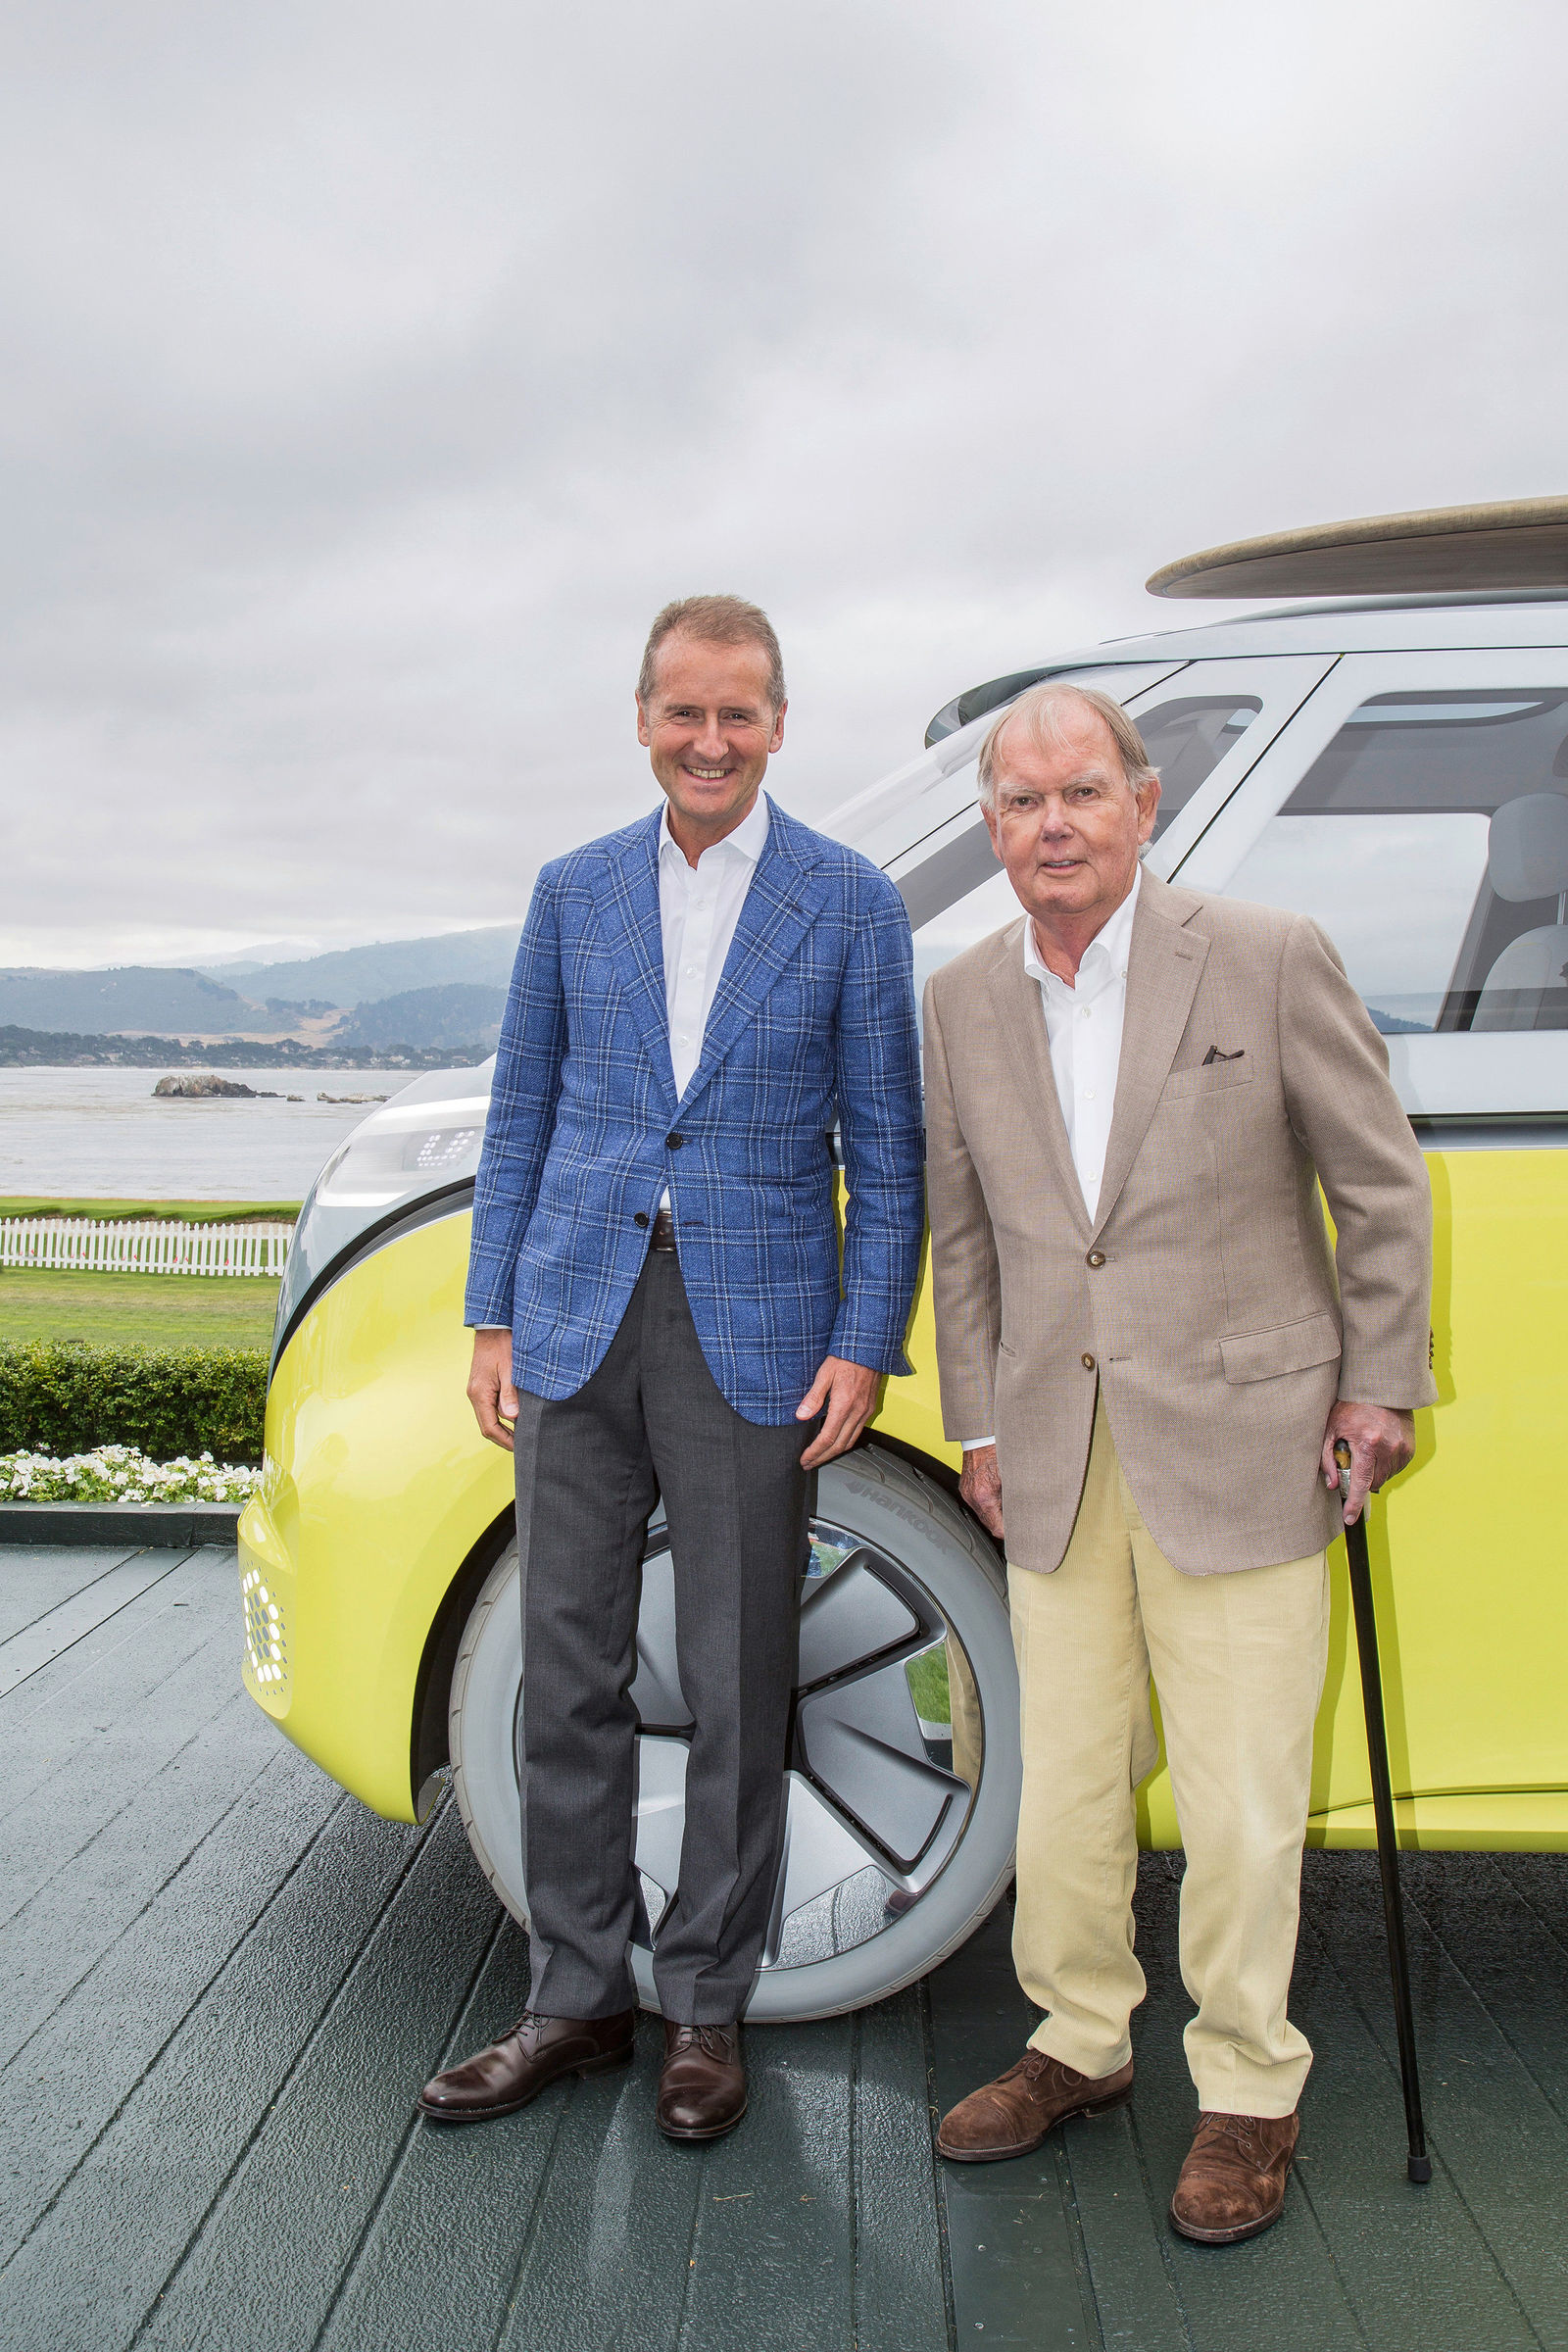 Volkswagen press conference at the Concours d'Elegance in Pebble Beach, California, August 18, 2017 - Series production of the ID. BUZZ based on the concept car announced